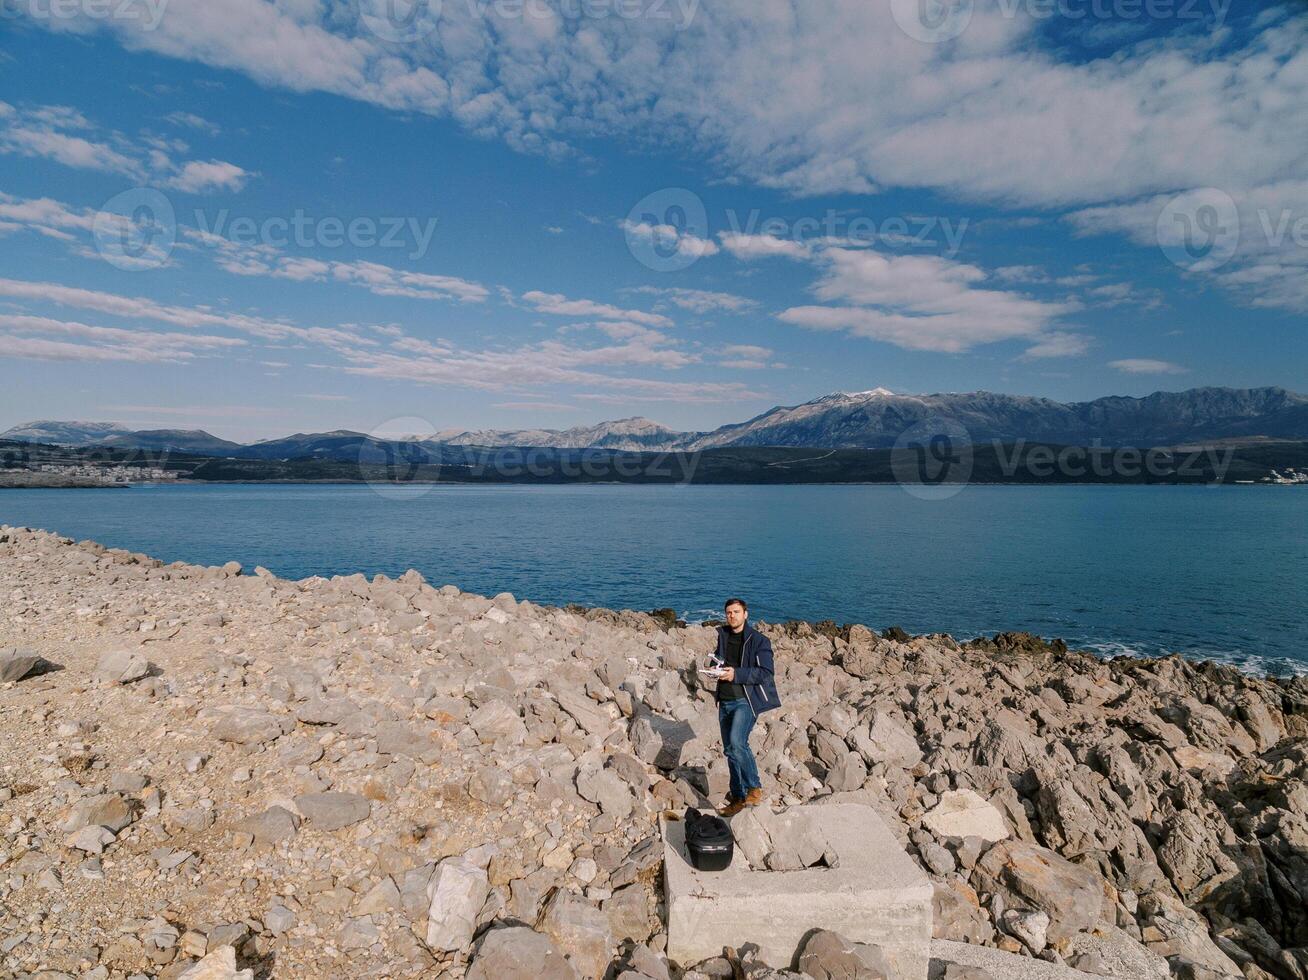 Operator with a drone remote control in his hands stands on a stone platform on a rocky seashore photo